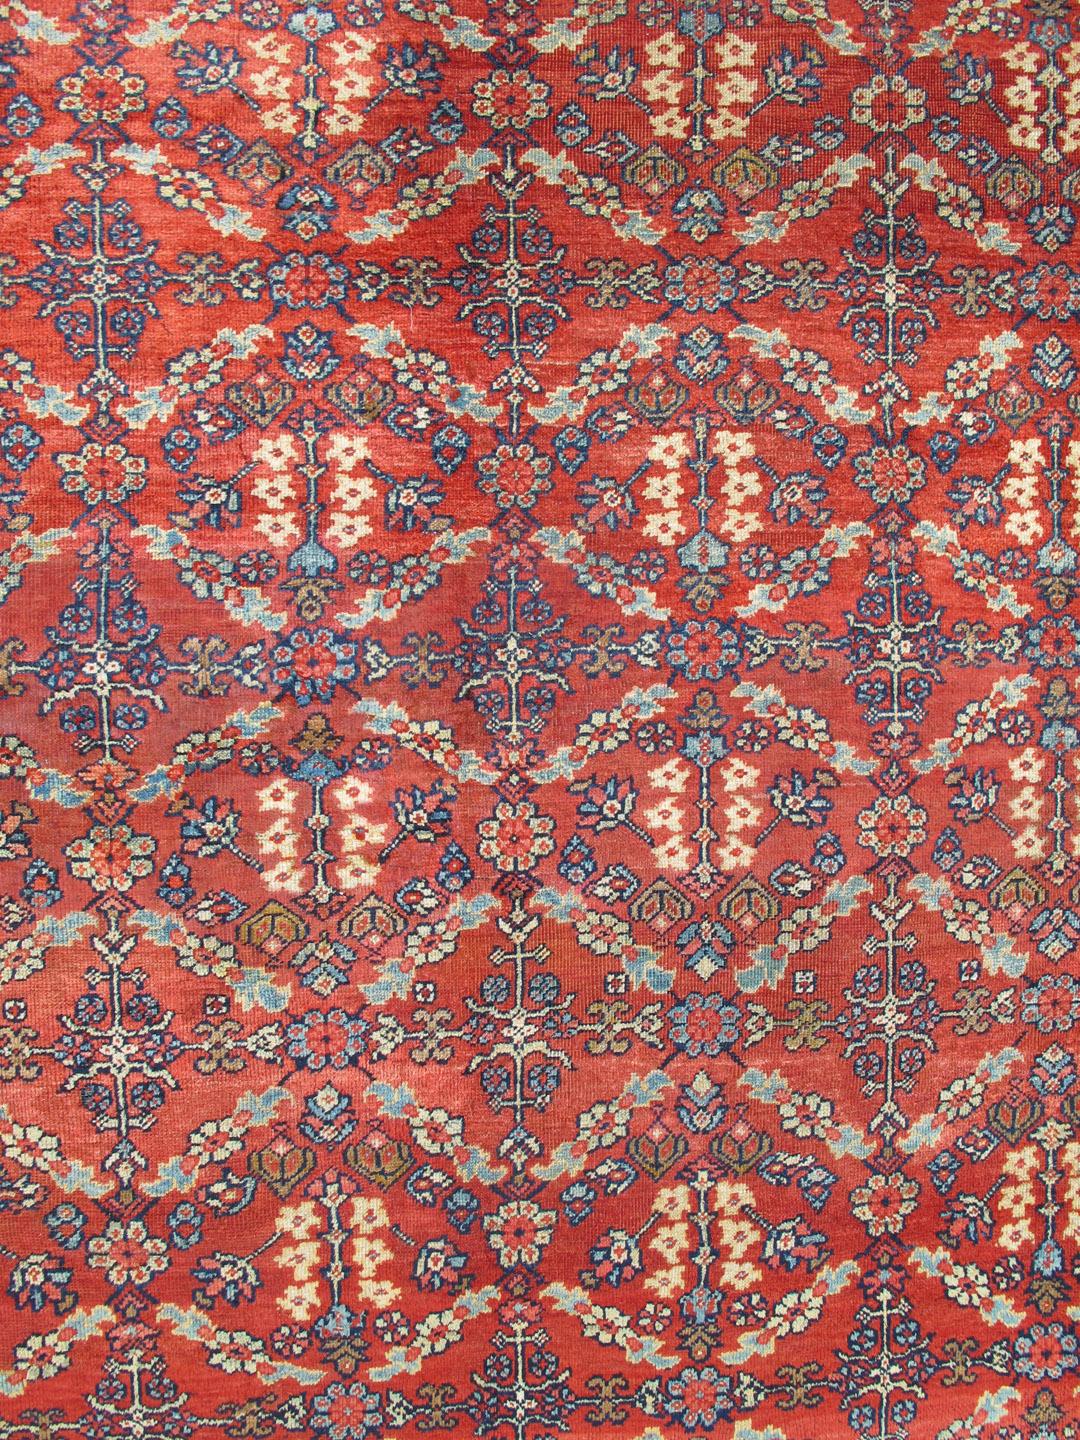 Red background antique Persian Mahal-Sultanabad rug with large flowers, 1920, Keivan Woven Arts/rug /G-0208, country of origin / type: Iran / Sultanabad, circa 1920

Measures: 9'0 x 9'10  

This antique square sized Persian Mahal Sultanabad carpet